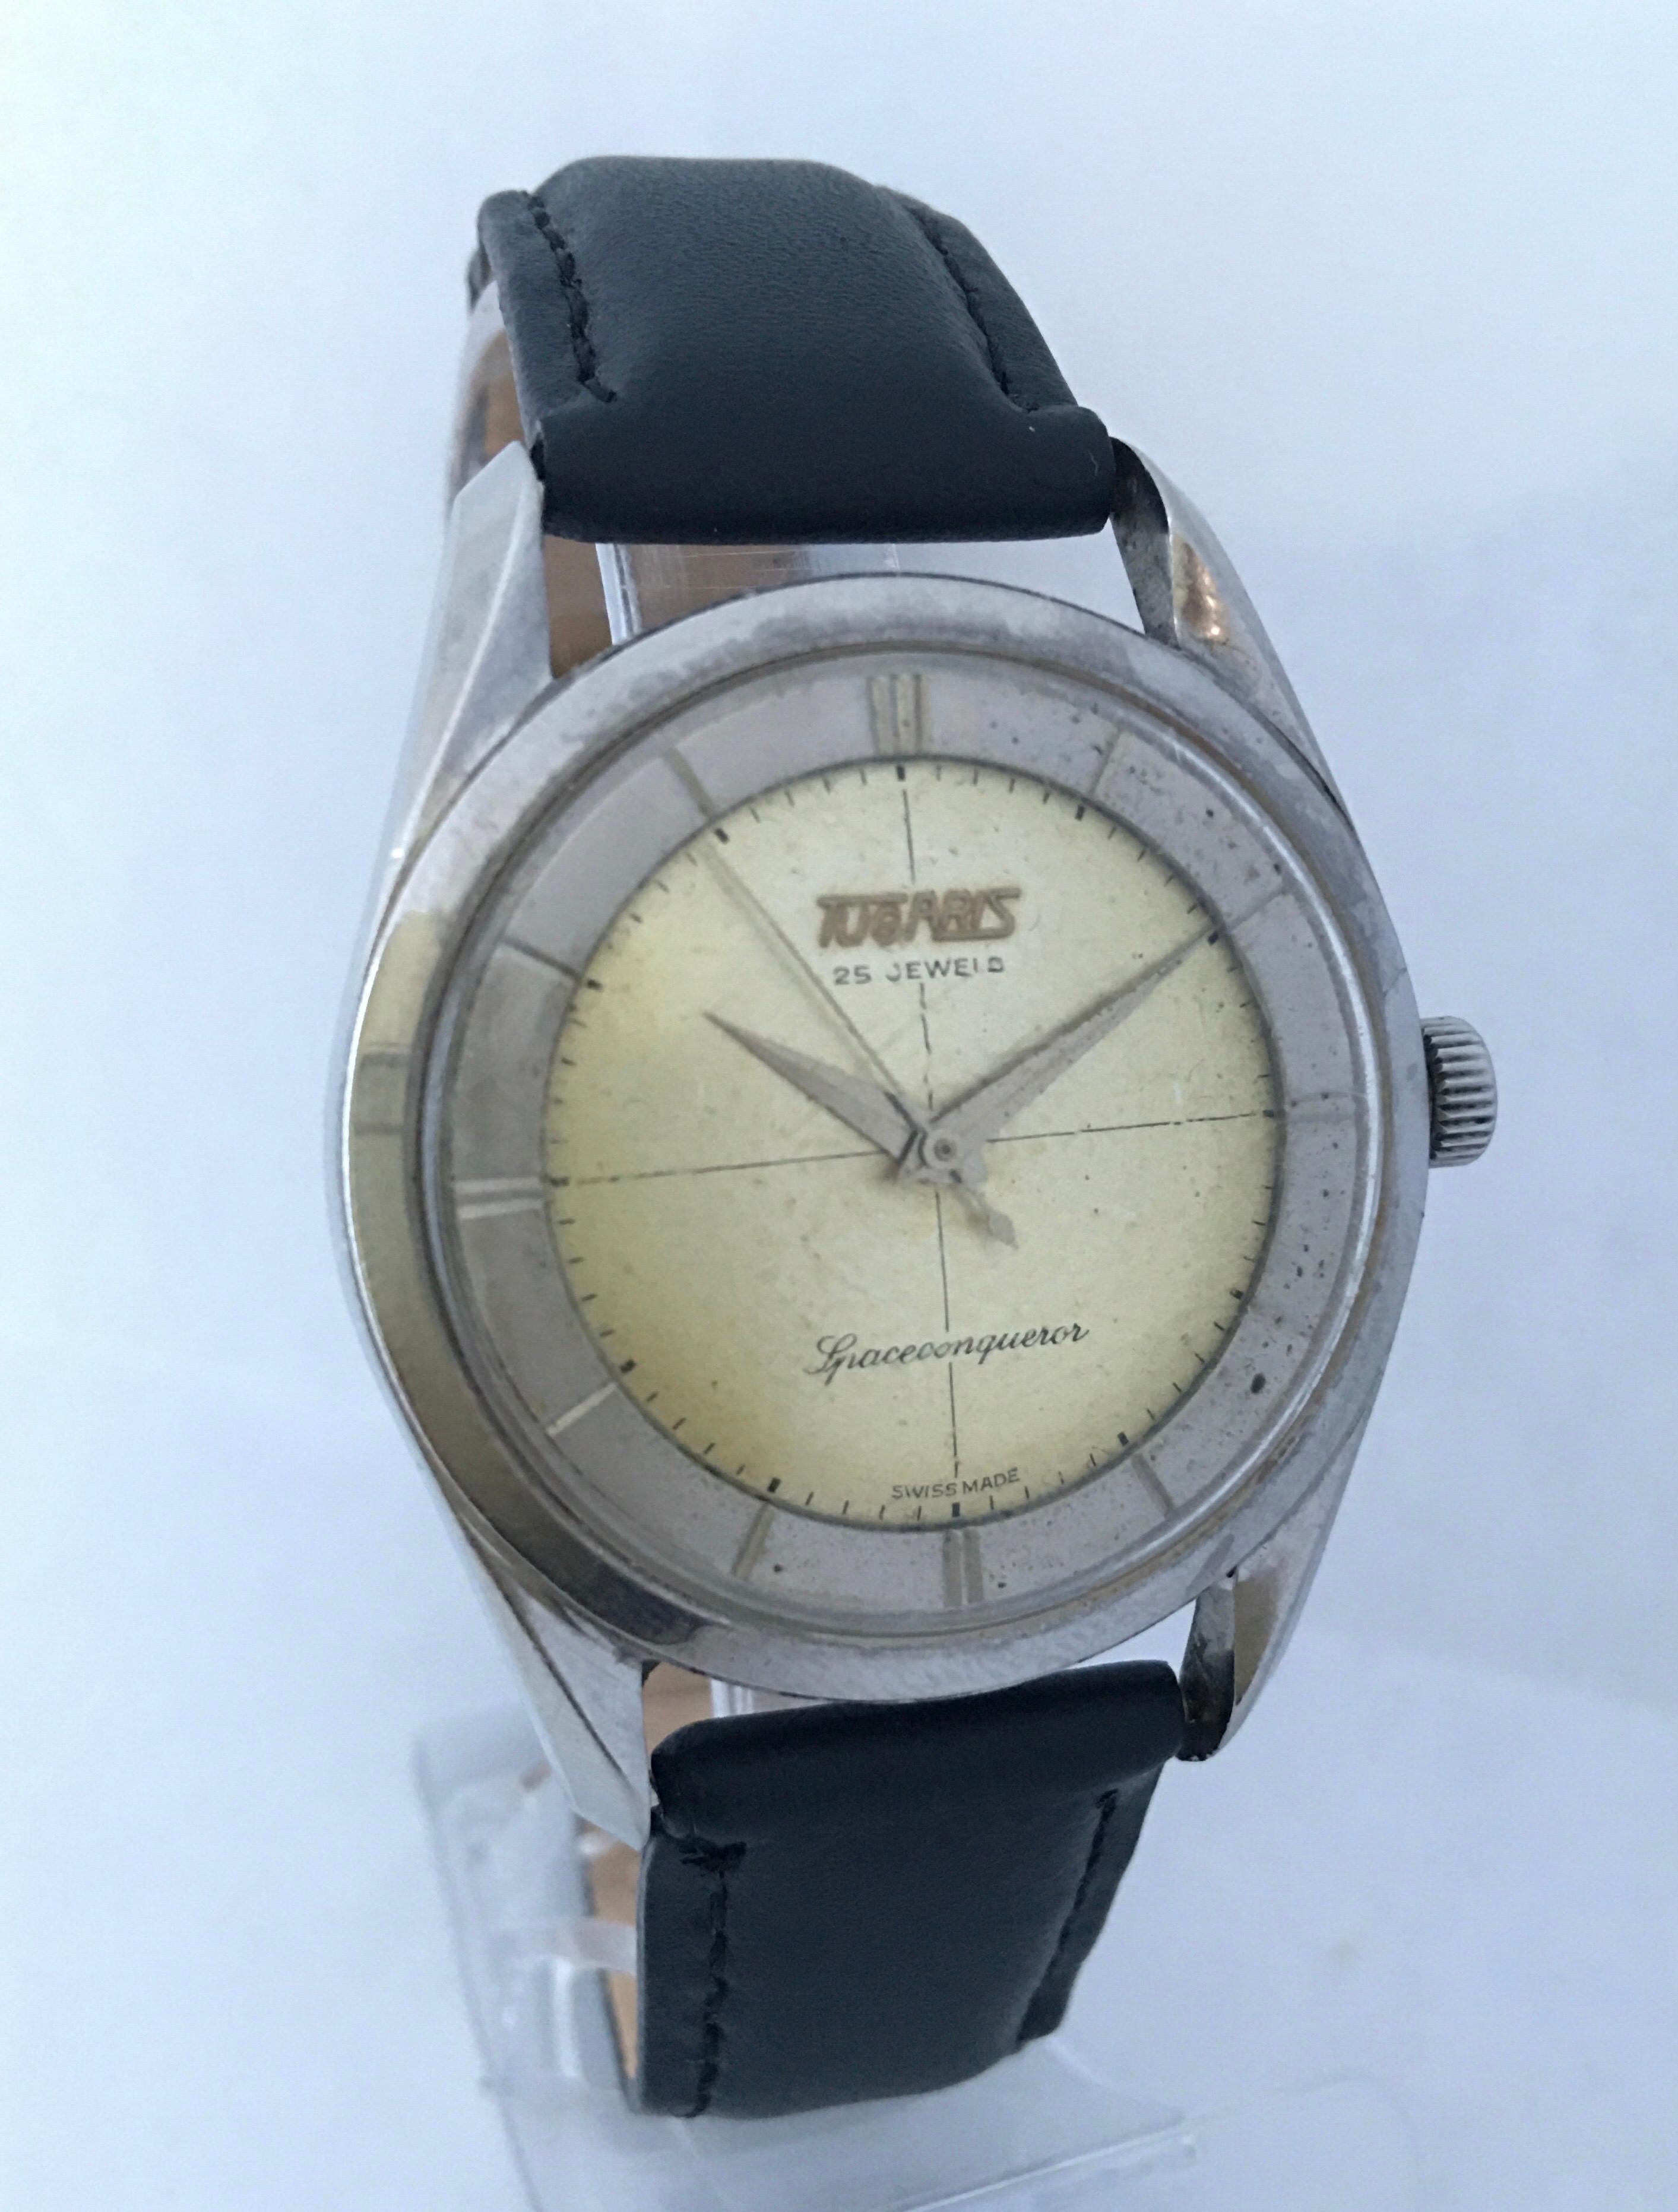 This beautiful pre-owned vintage automatic ( self winding) watch is working and it is ticking well. But I cannot guarantee the time accuracy. Visible signs of ageing and wear with light scratches on on the glass and on the steel watch case as shown.